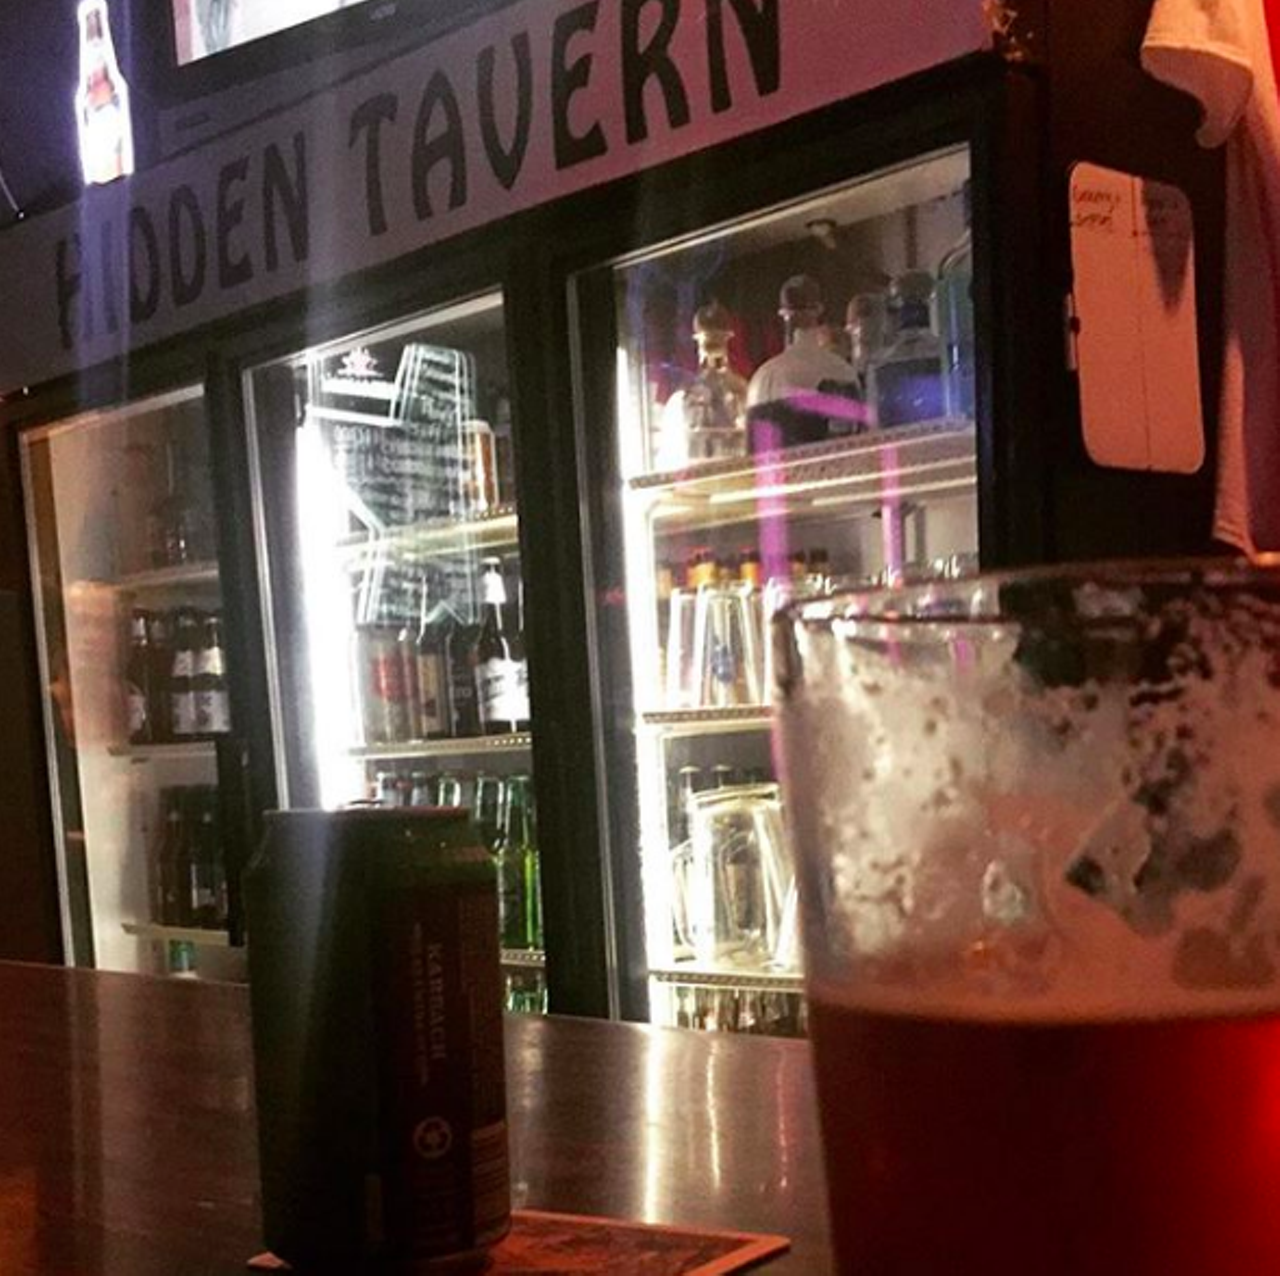 Hidden Tavern
11407 West Ave, (210) 541-0001, 
Need a bare-bones drinking spot that makes it the priority for you to get drunk off your ass? We found it. This underrated watering hole has billiards, darts and of course live music for all types of fun.
Photo via Instagram / mrschrislopez